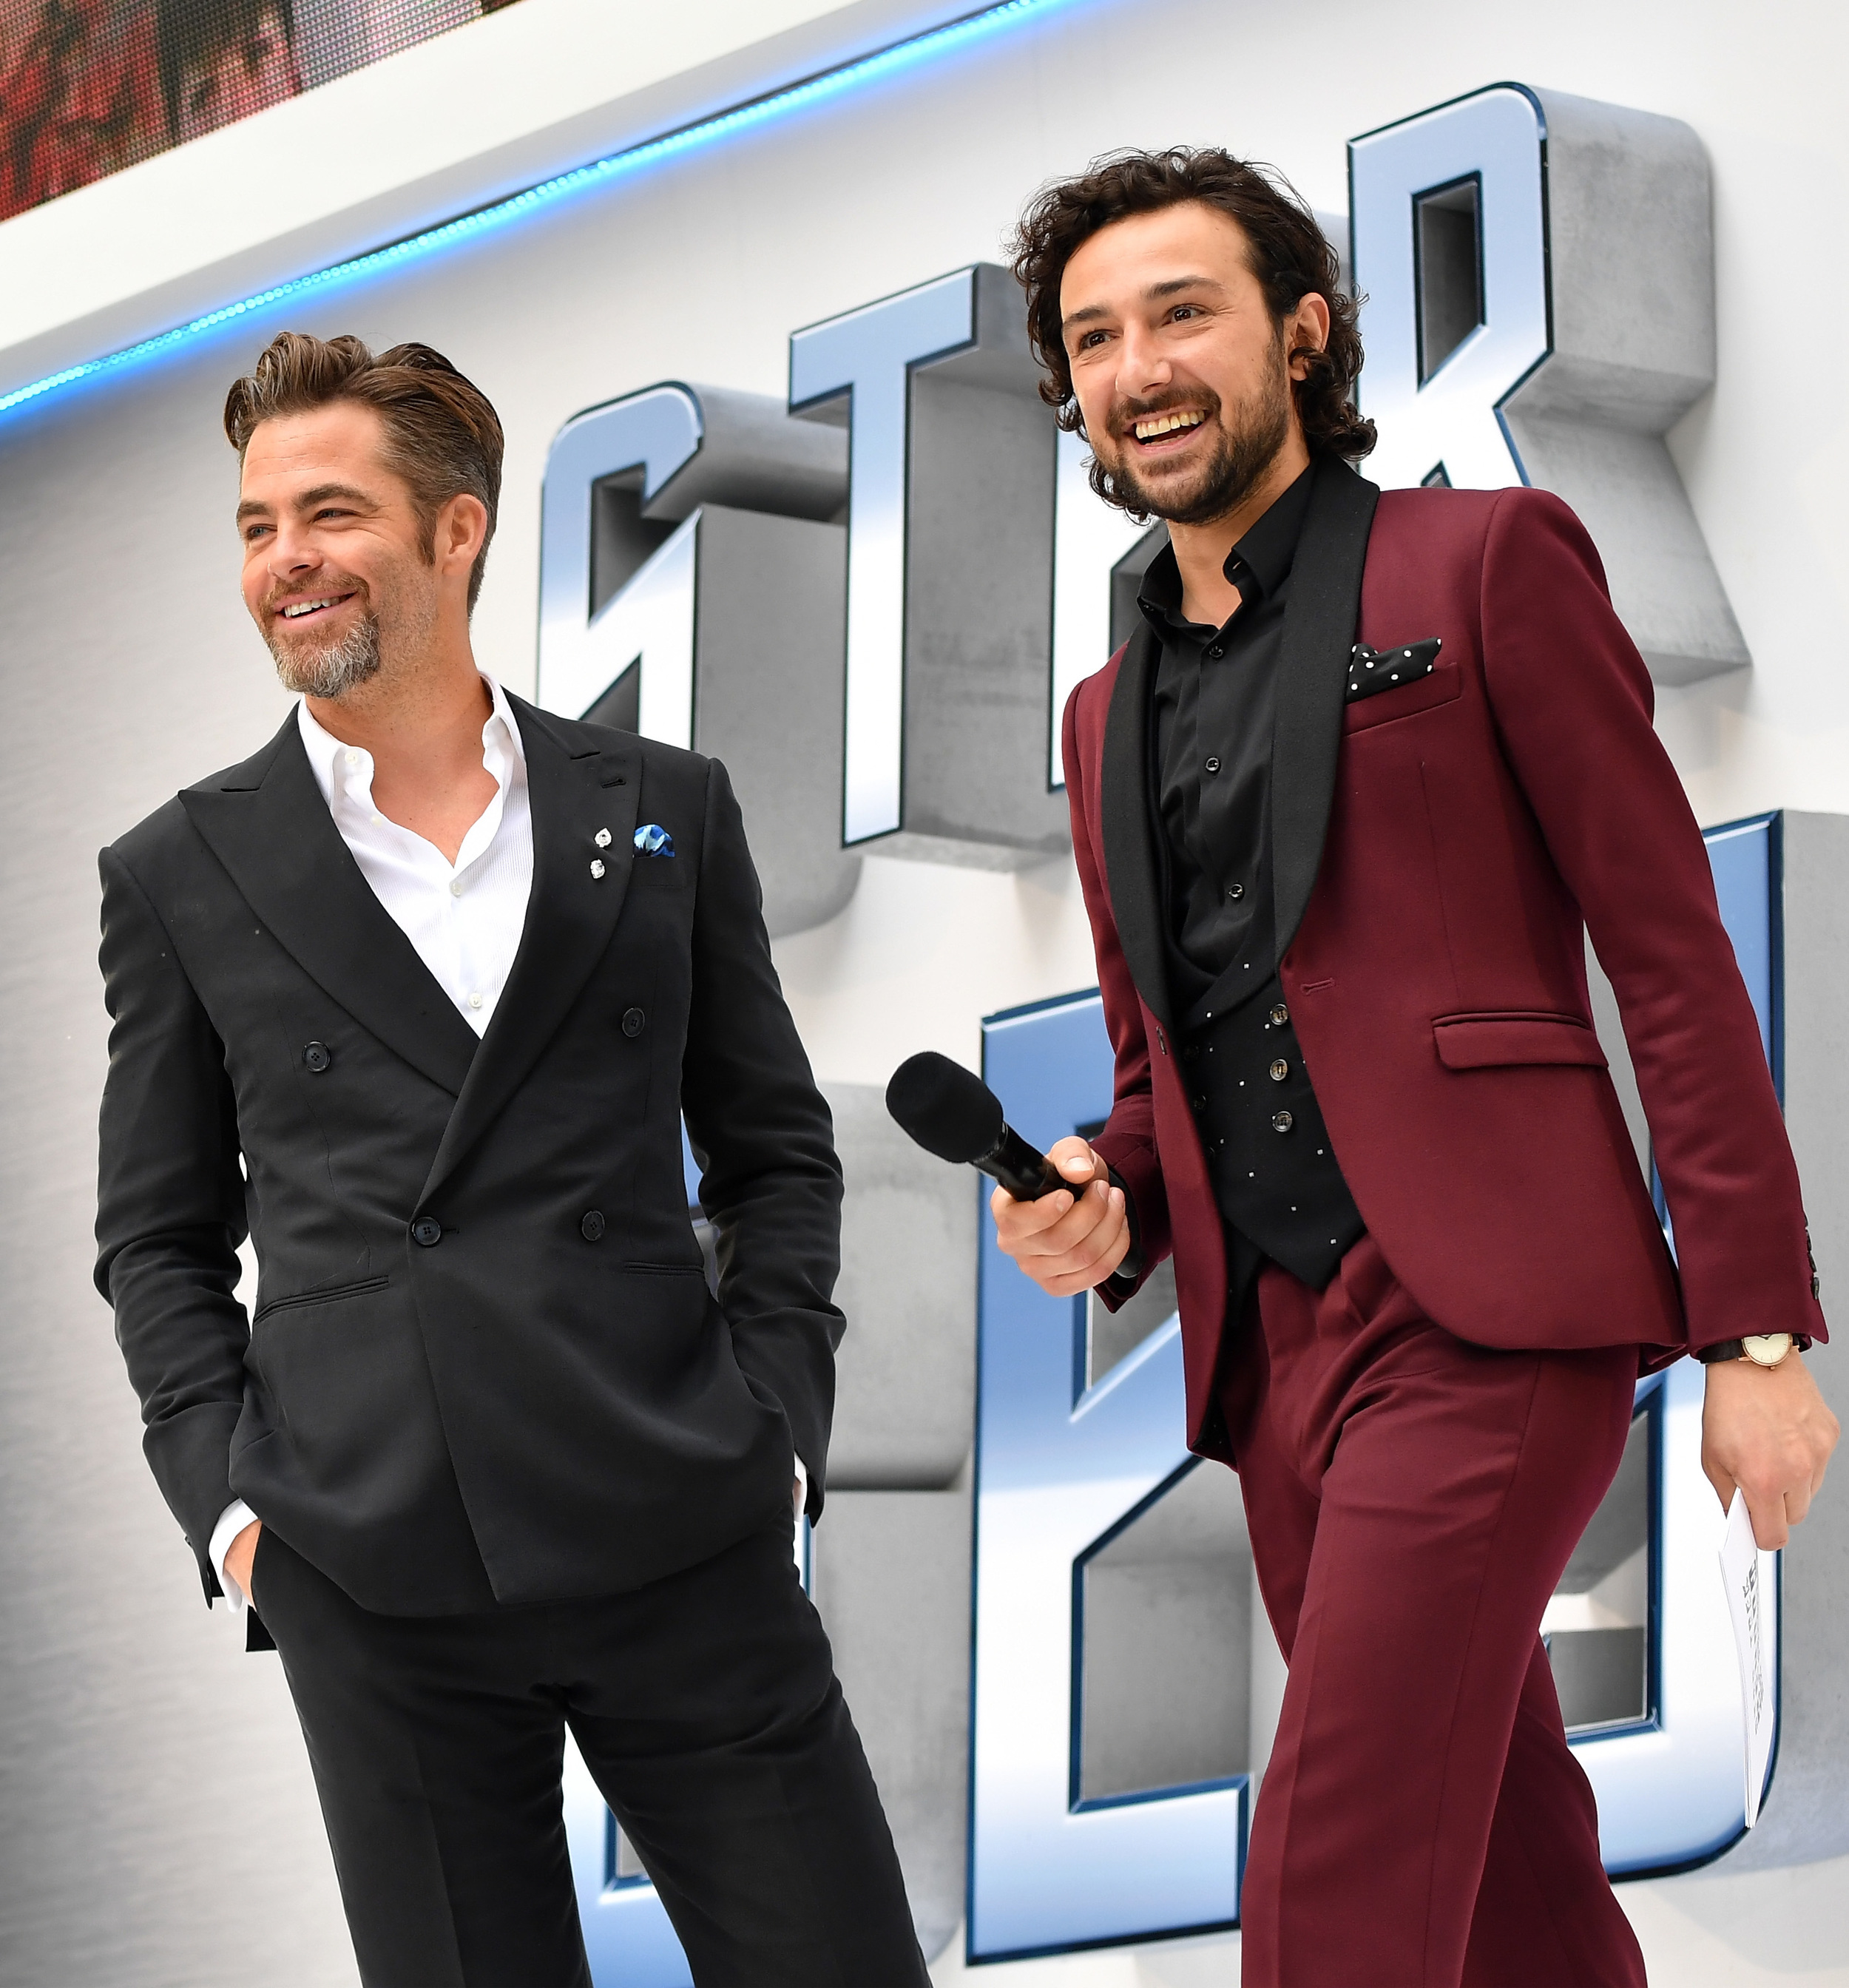  LONDON, ENGLAND - JULY 12:  Actor Chris Pine and host Alex Zane attends the UK Premiere of Paramount Pictures "Star Trek Beyond" at the Empire Leicester Square on July 12, 2016 in London, England.  (Photo by Gareth Cattermole/Getty Images for Paramo